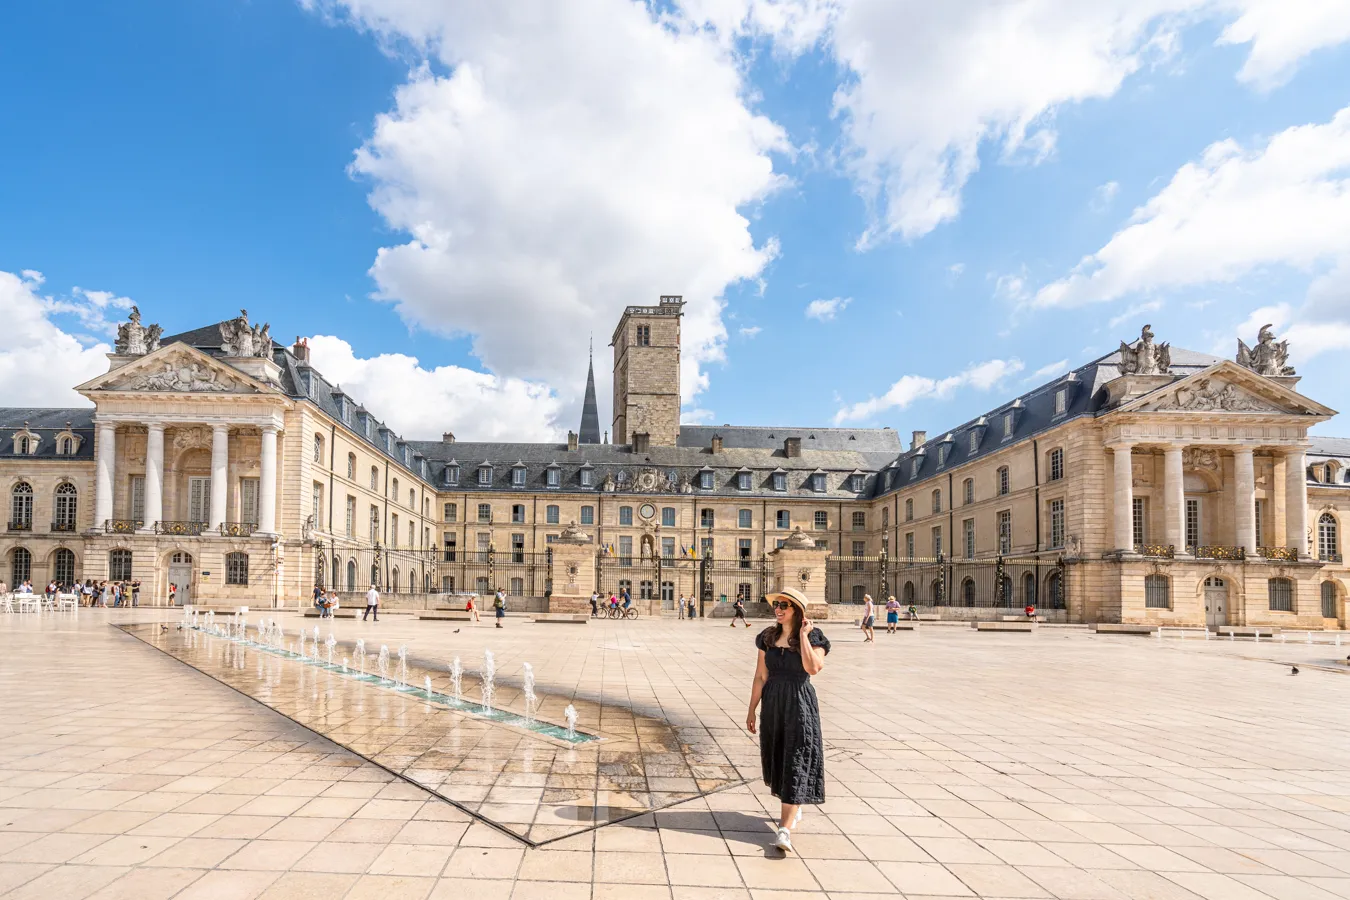 kate storm with the ducal palace in liberation square, one of the best things to do in dijon france